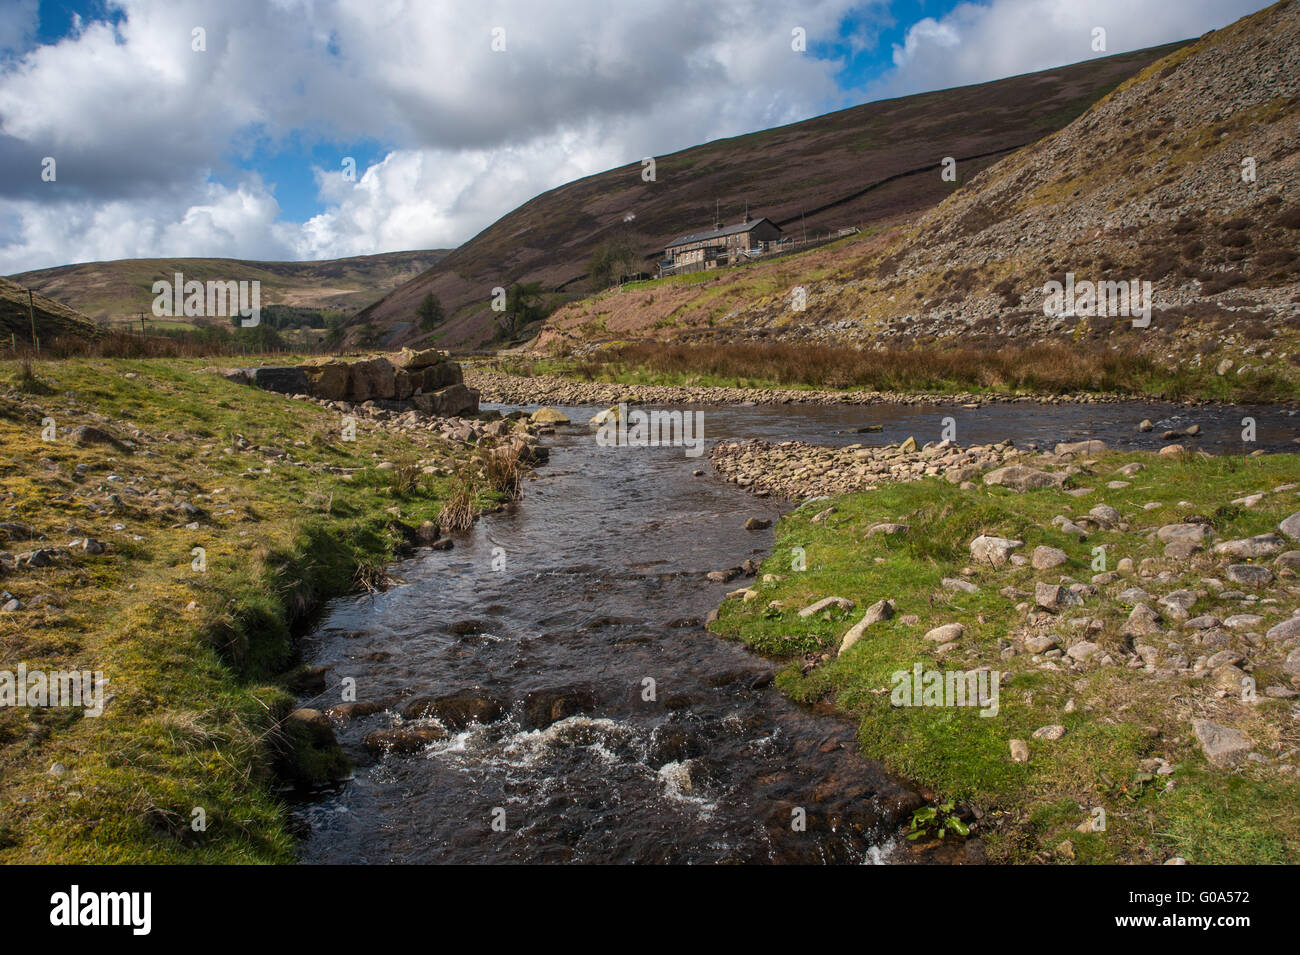 The Langden Brook and Smelt Mill Cottages in The Trough of Bowland Stock Photo